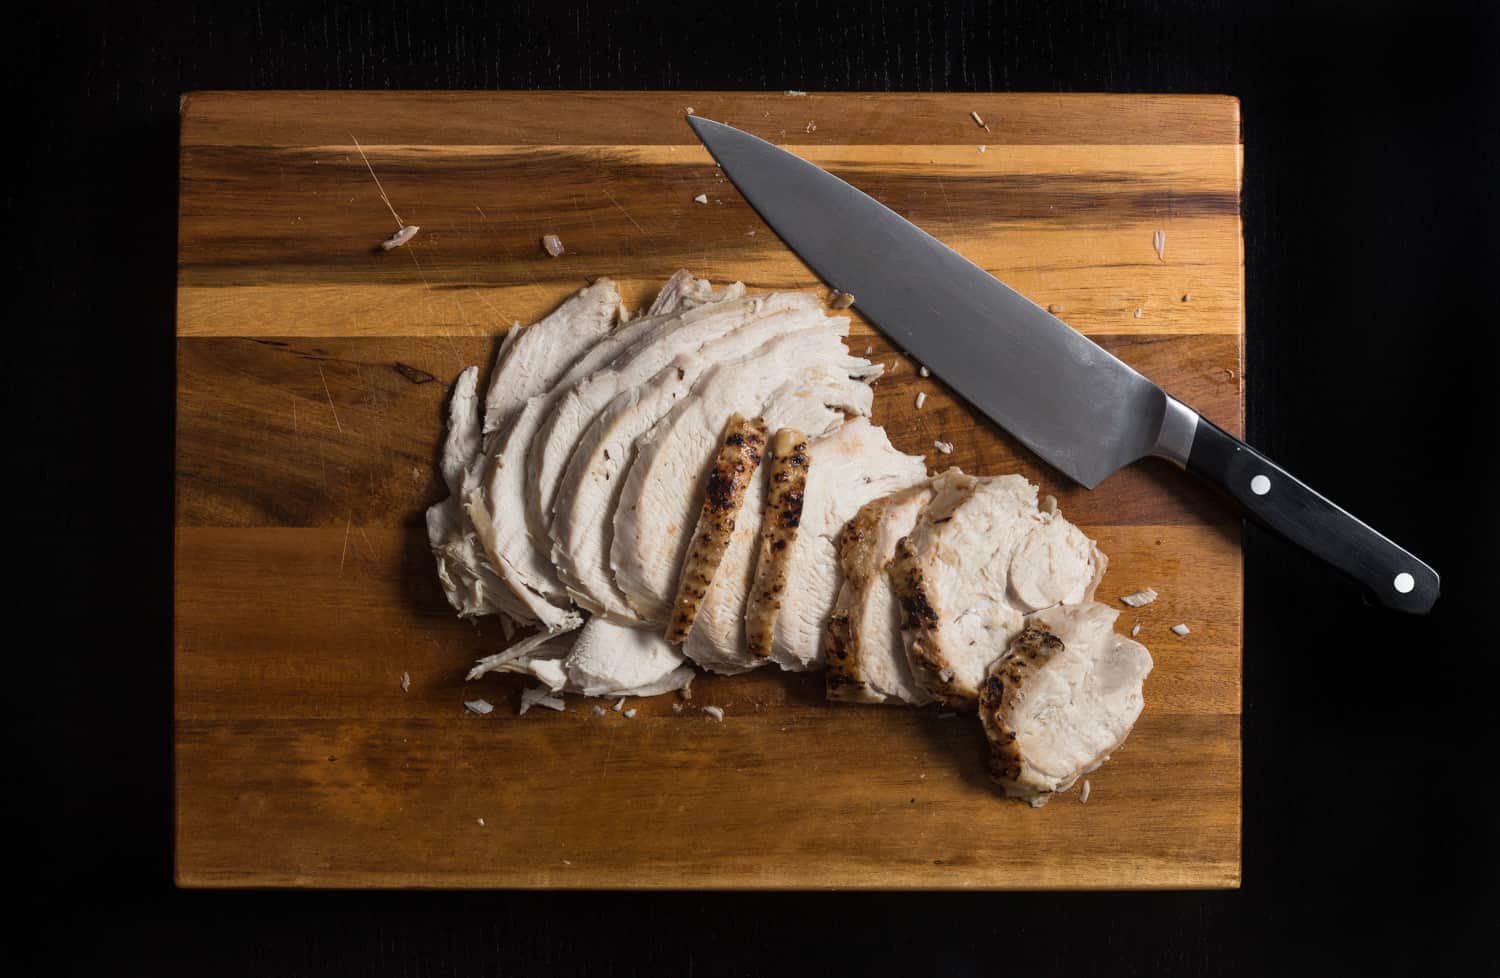 Instant Pot Turkey Breast Recipe (Pressure Cooker Turkey Breast): how to cook tender and moist turkey dinner with homemade turkey gravy and mashed potatoes - one pot turkey dinner for Thanksgiving and Christmas holidays.